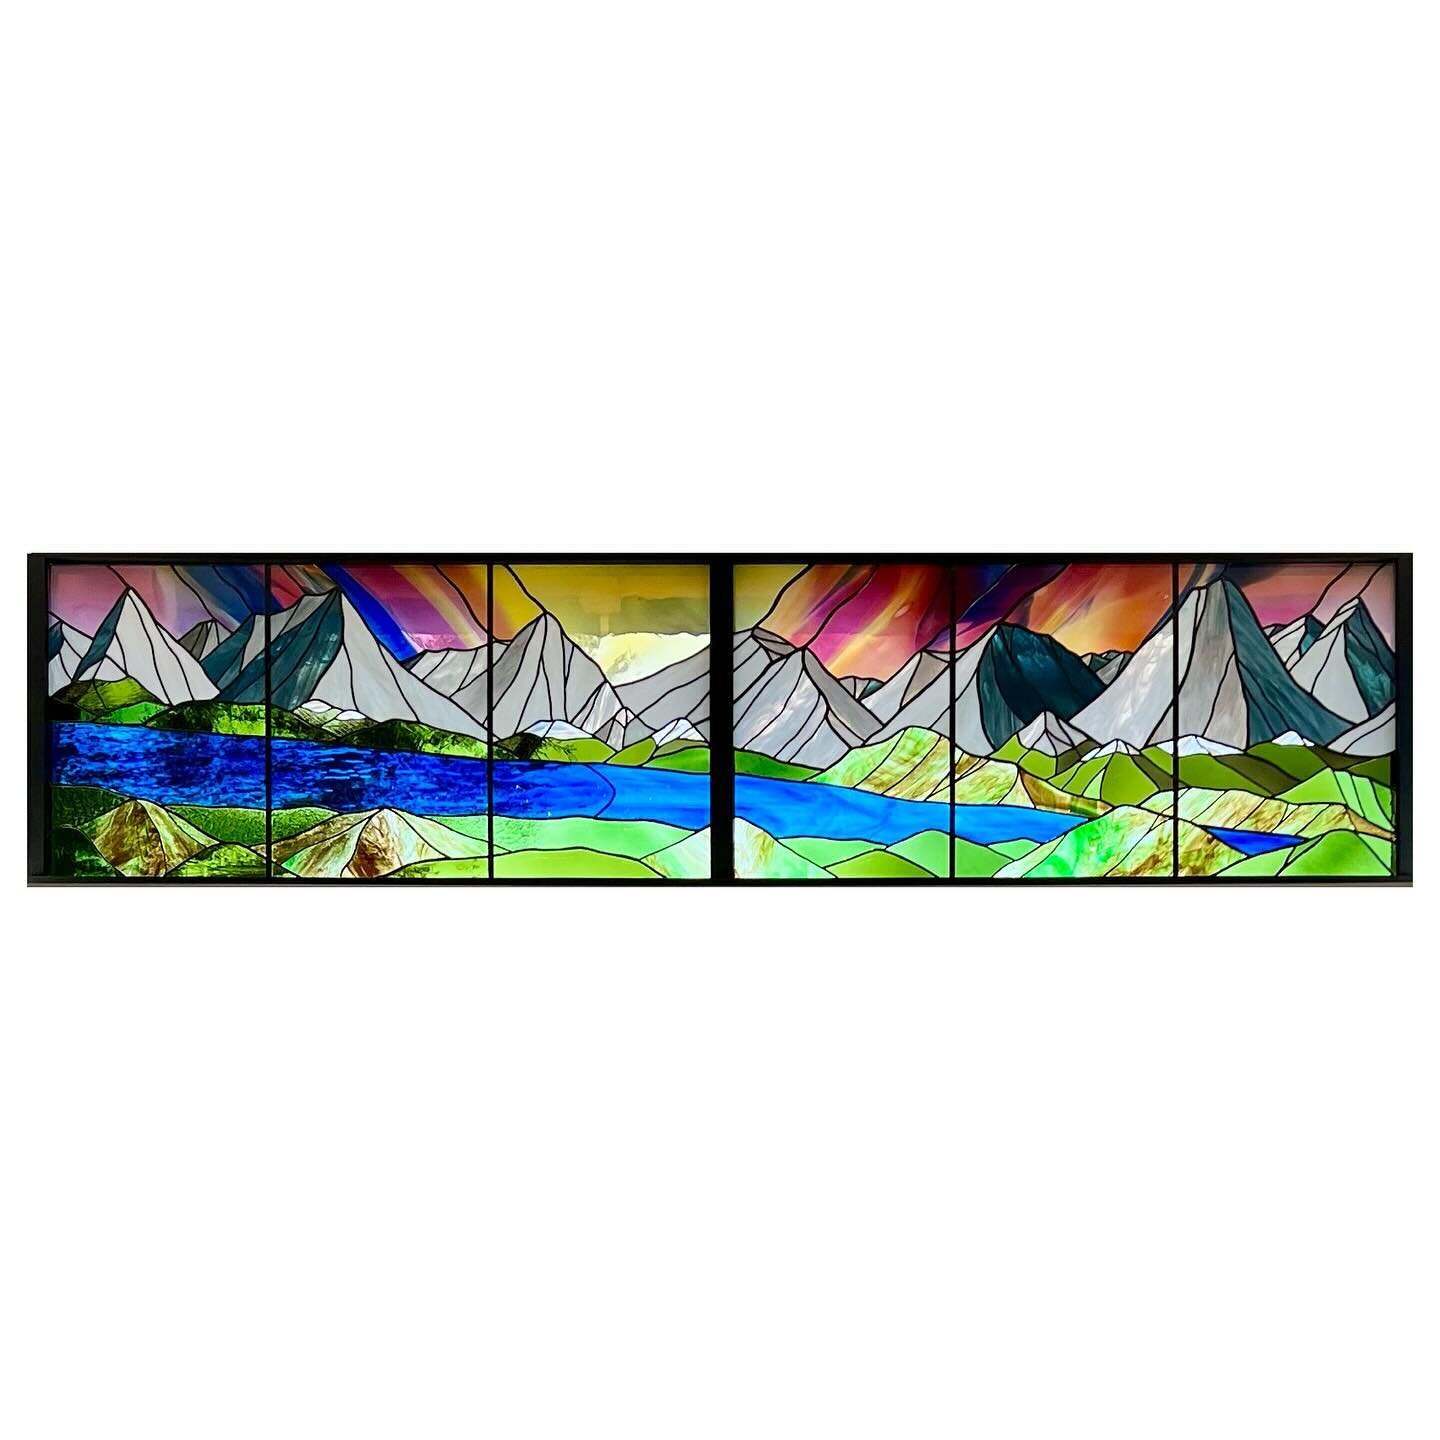 Sharing a few still shots from this big range of glass mountains. I have a huge appreciation for the client for entrusting me with art for this central room in their home and Phil and Dane who helped package, transport and install these panels into a